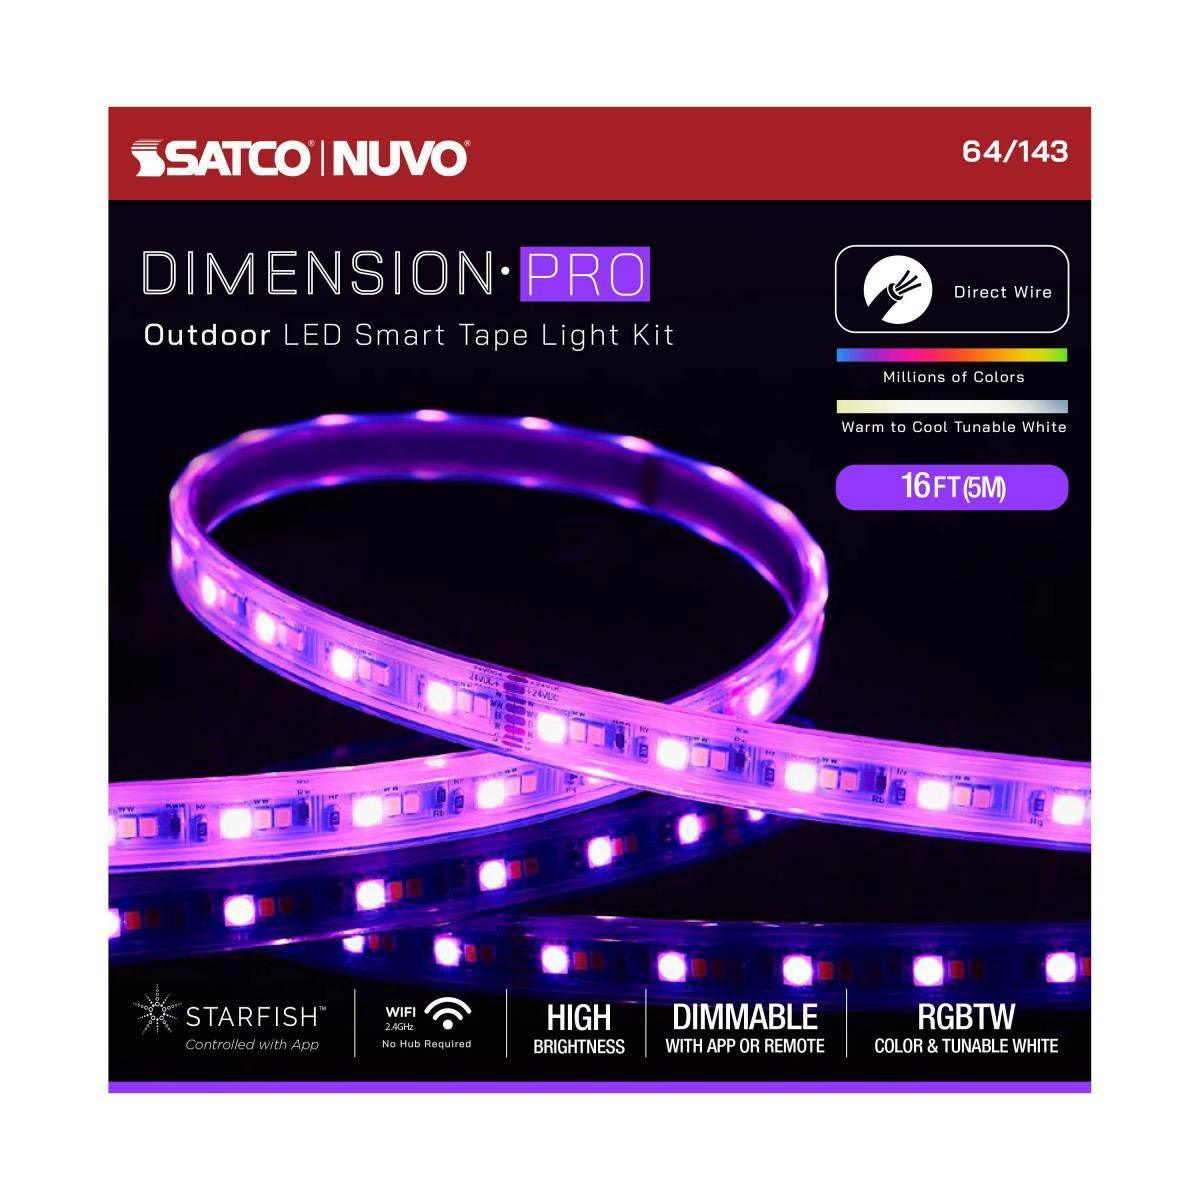 Dimension Pro Outdoor Smart LED Tape Light Kit with Remote, 16ft Reel, Color Changing RGB and Tunable White, 24V, J-Box Connection